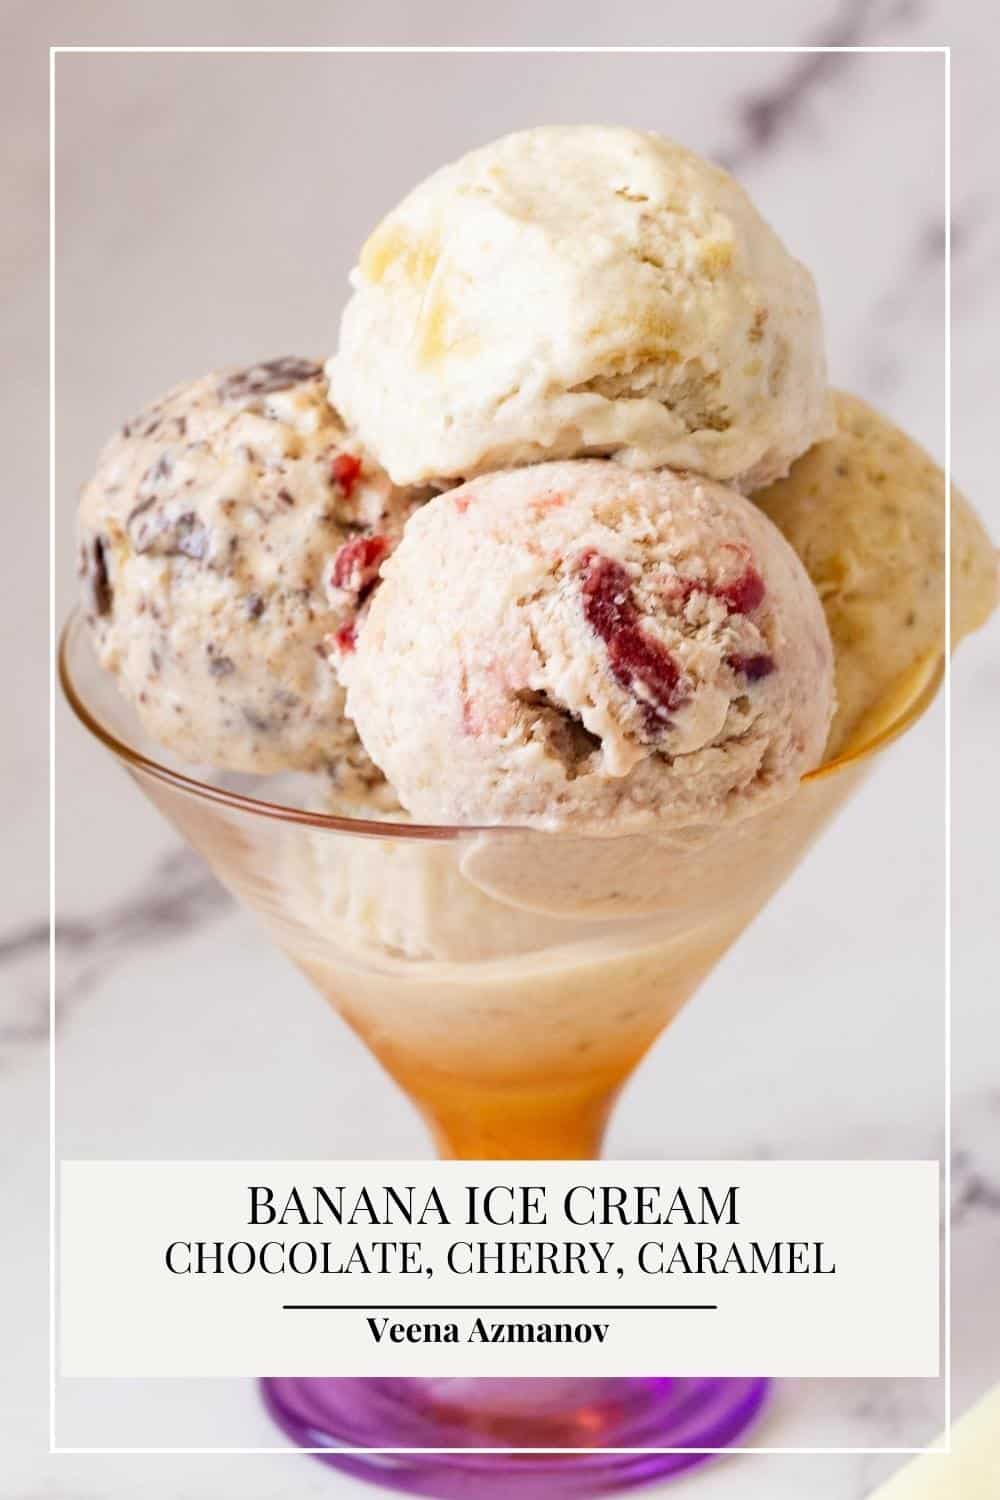 Pinterest image for Ice cream with Banana and Caramel, Chocolate, Cherry.